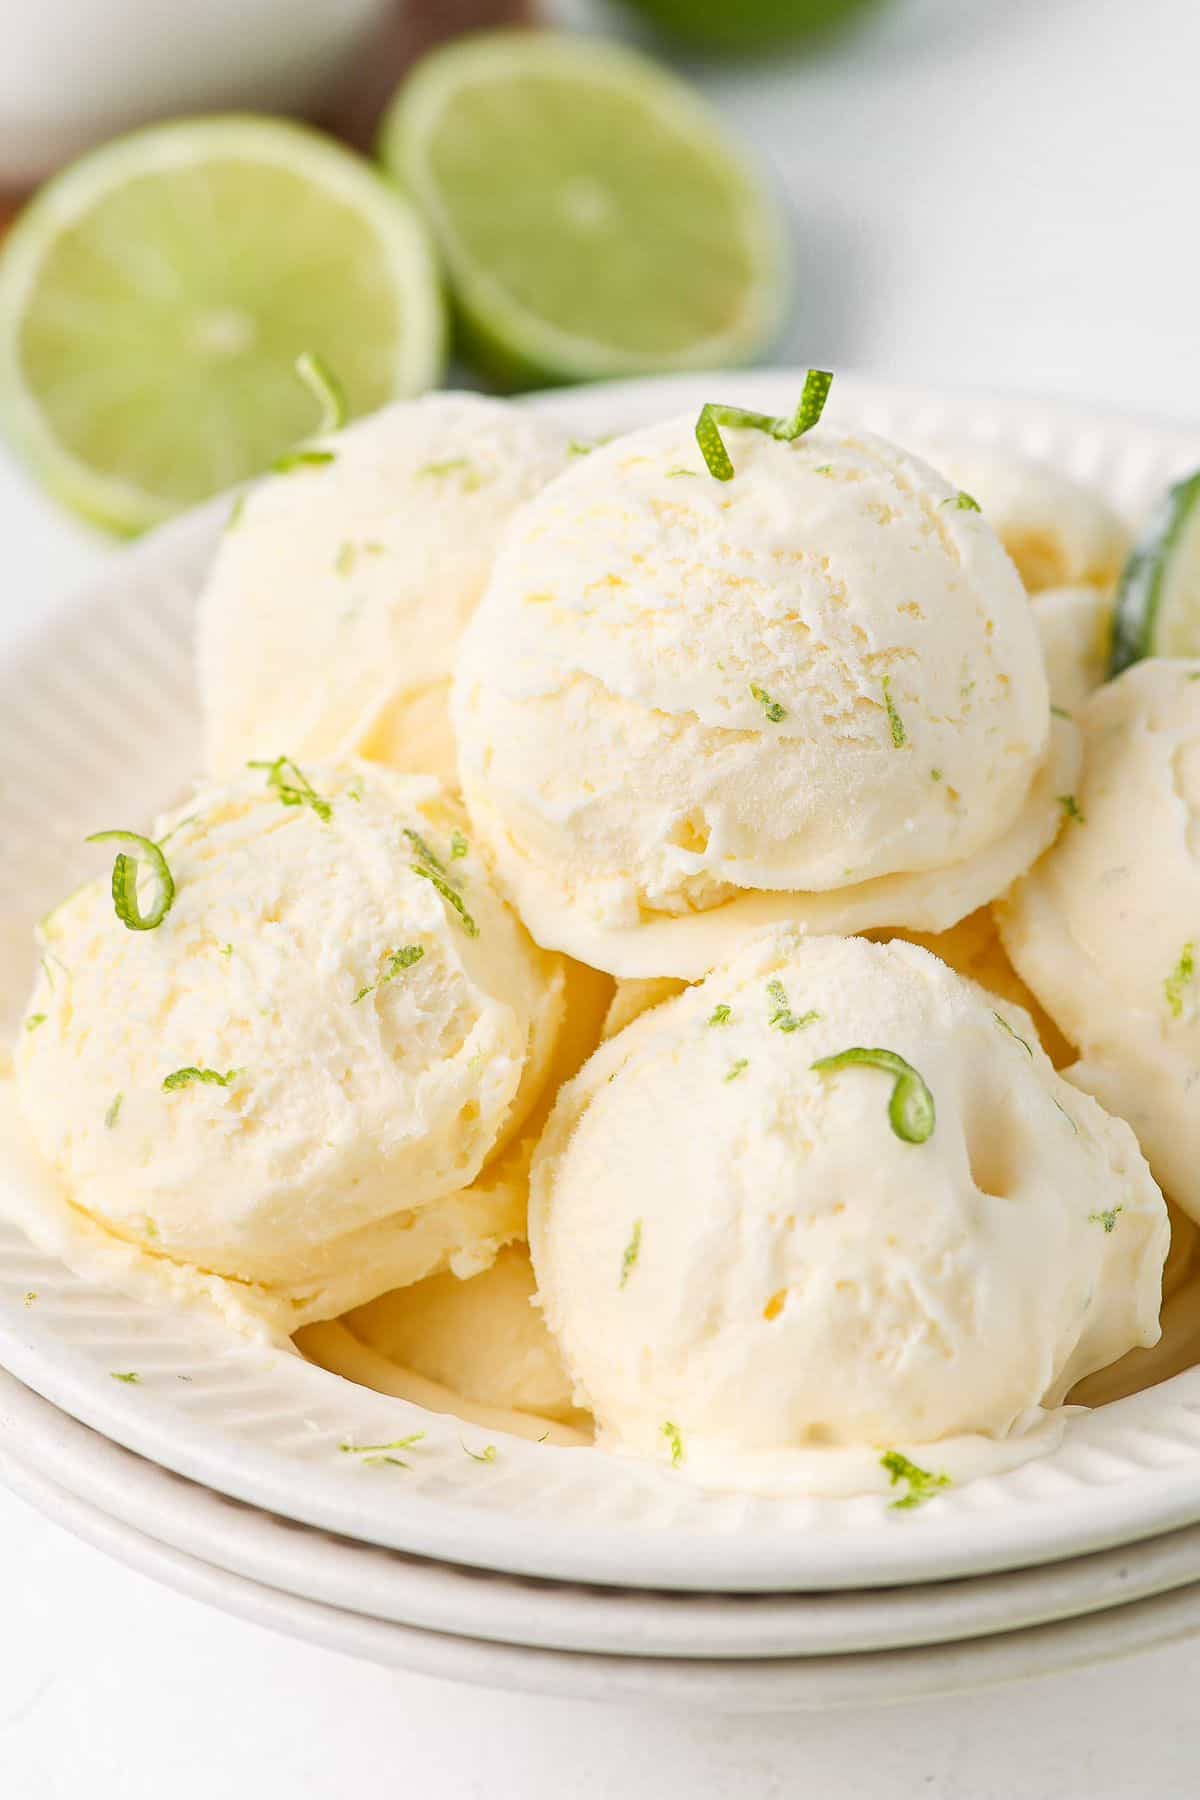 Bowl with several scoops of ice cream, garnished with lime zest.